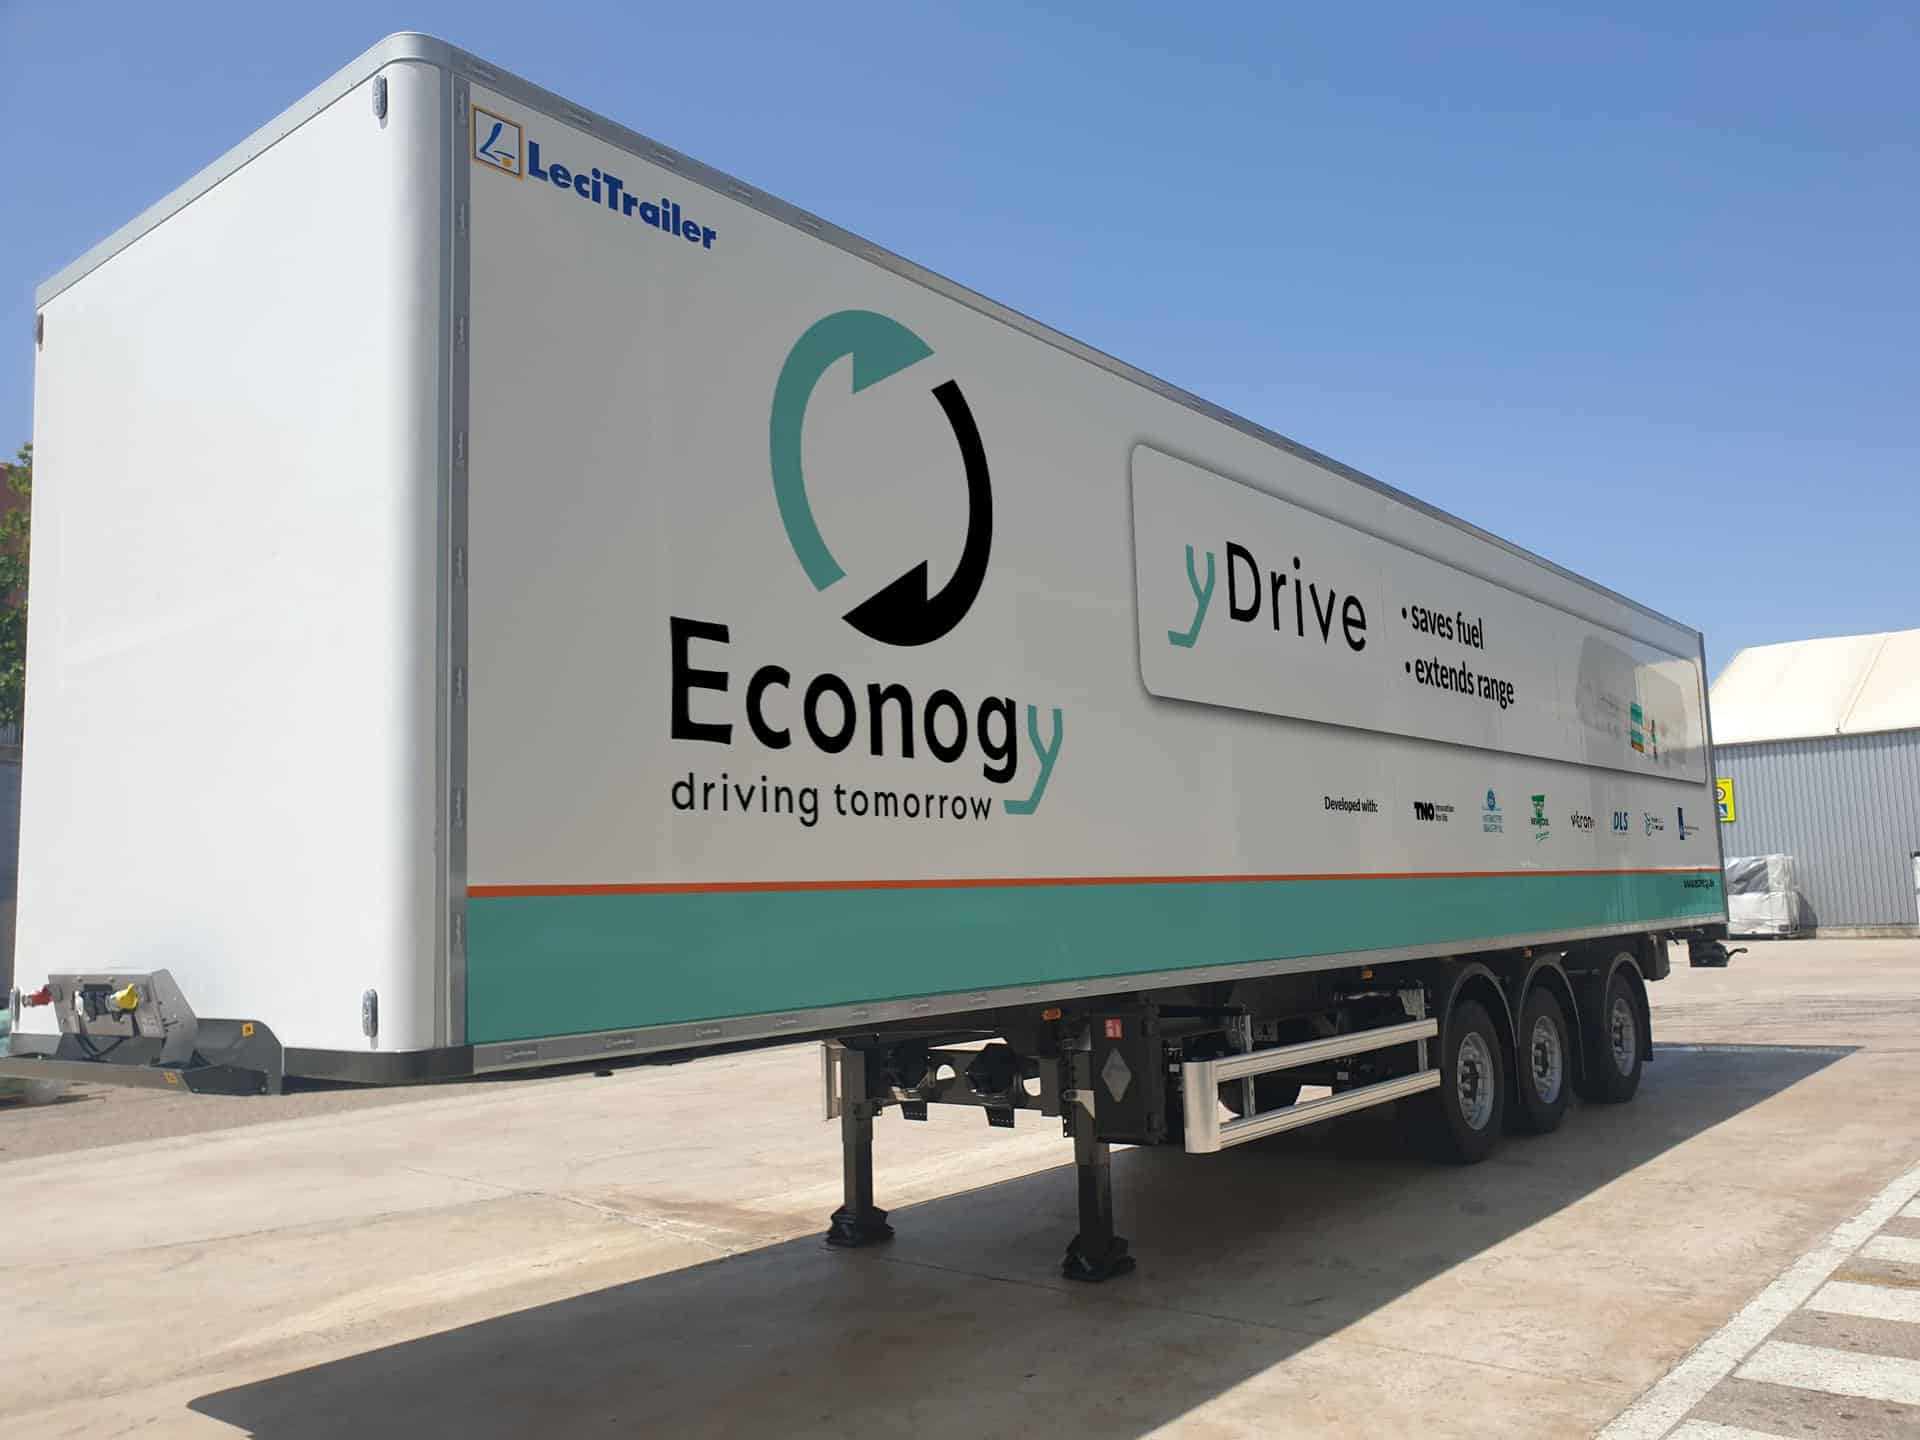 The electric powertrain for trailers yDrive claims 40% fuel savings